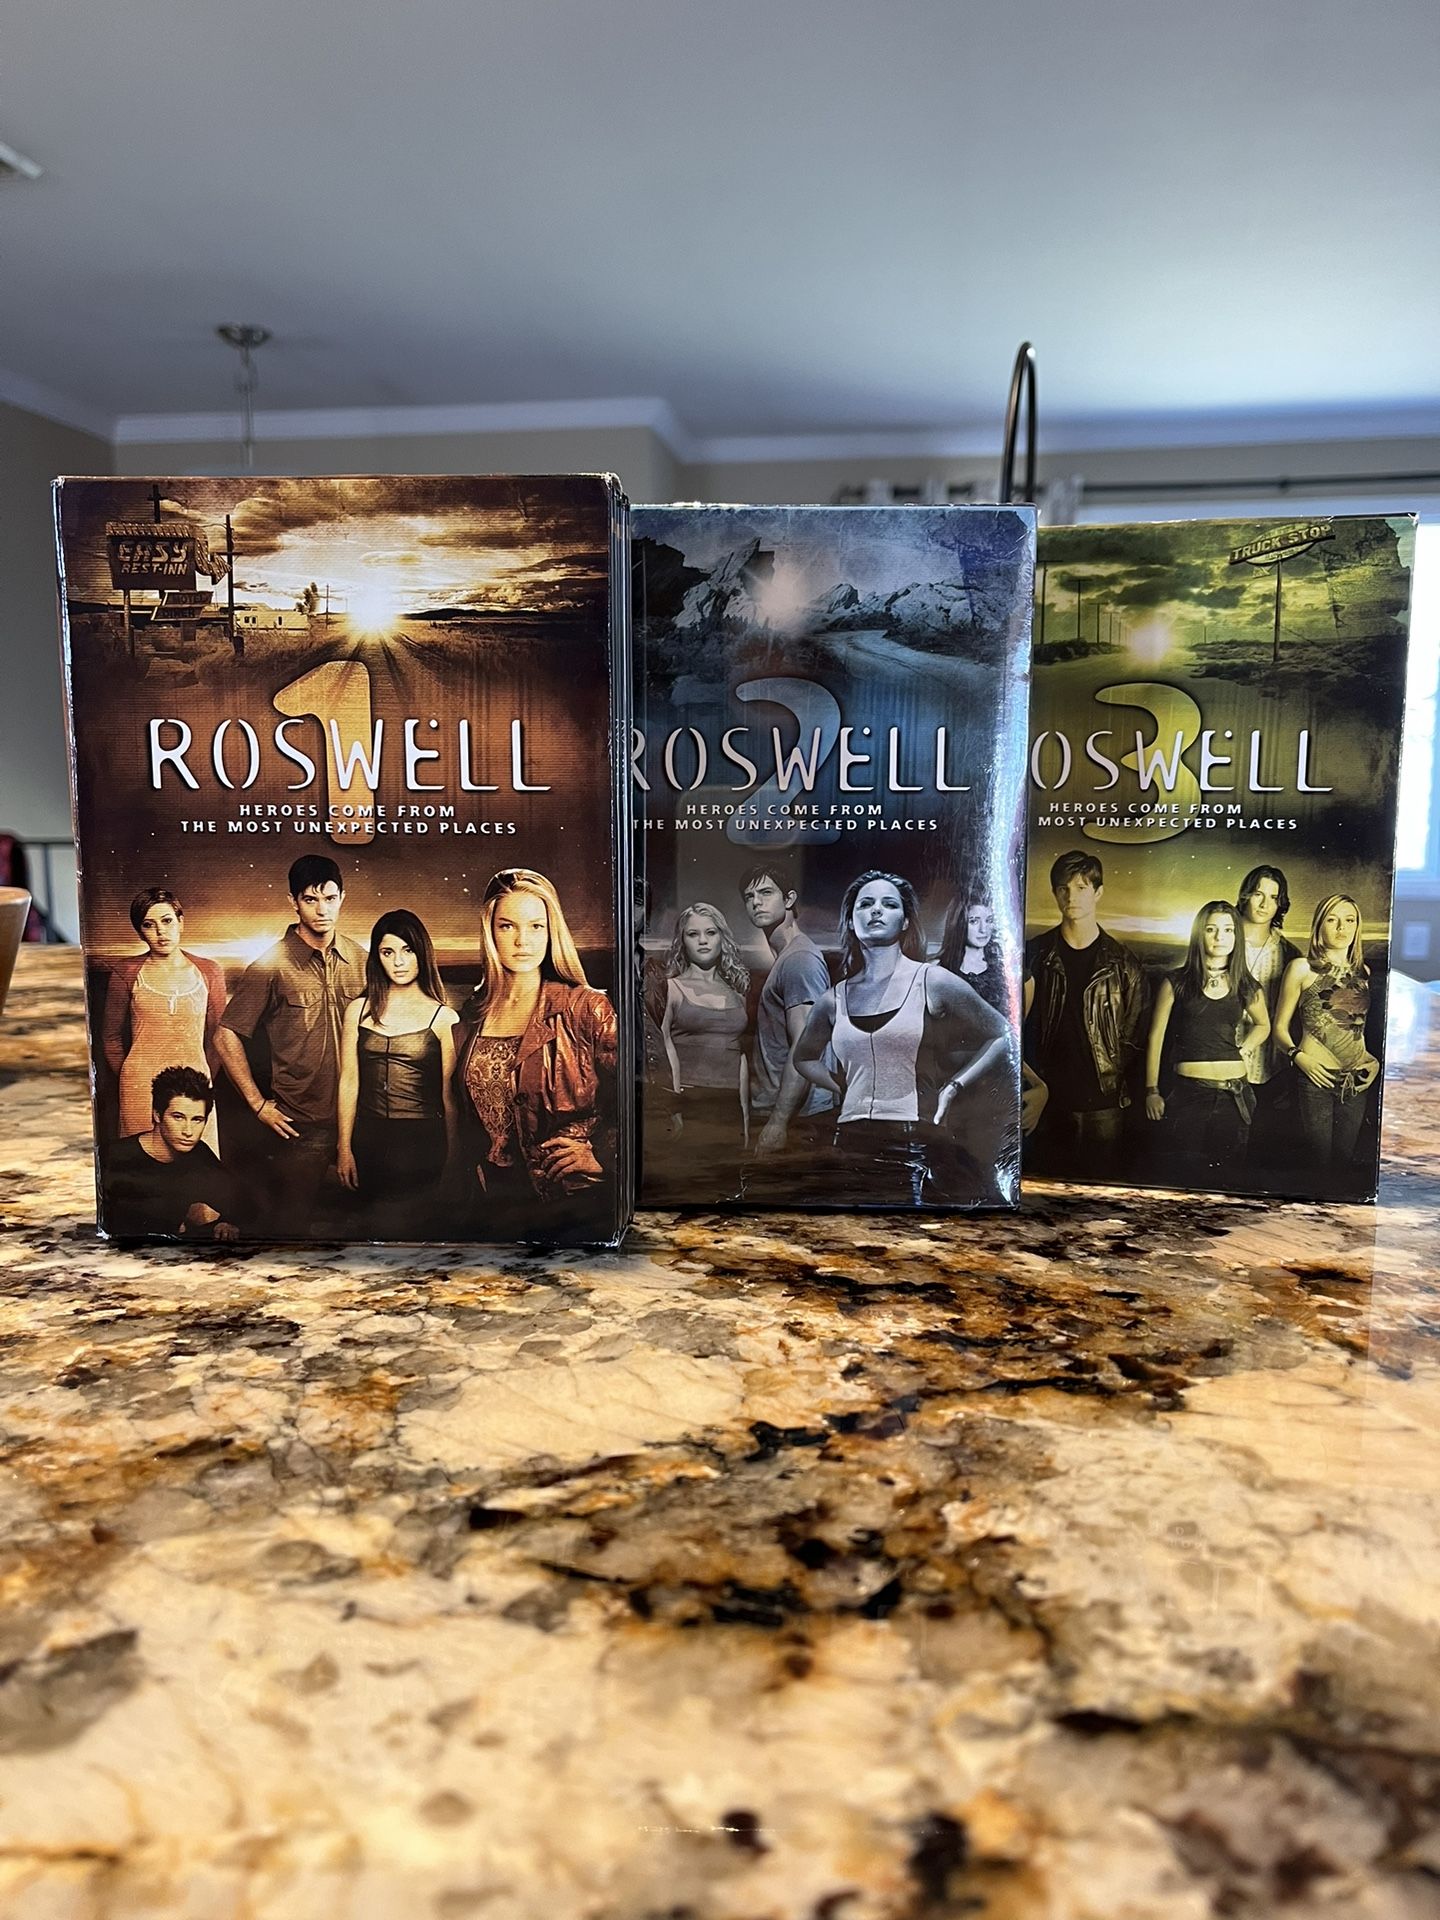 Roswell DVD’s 